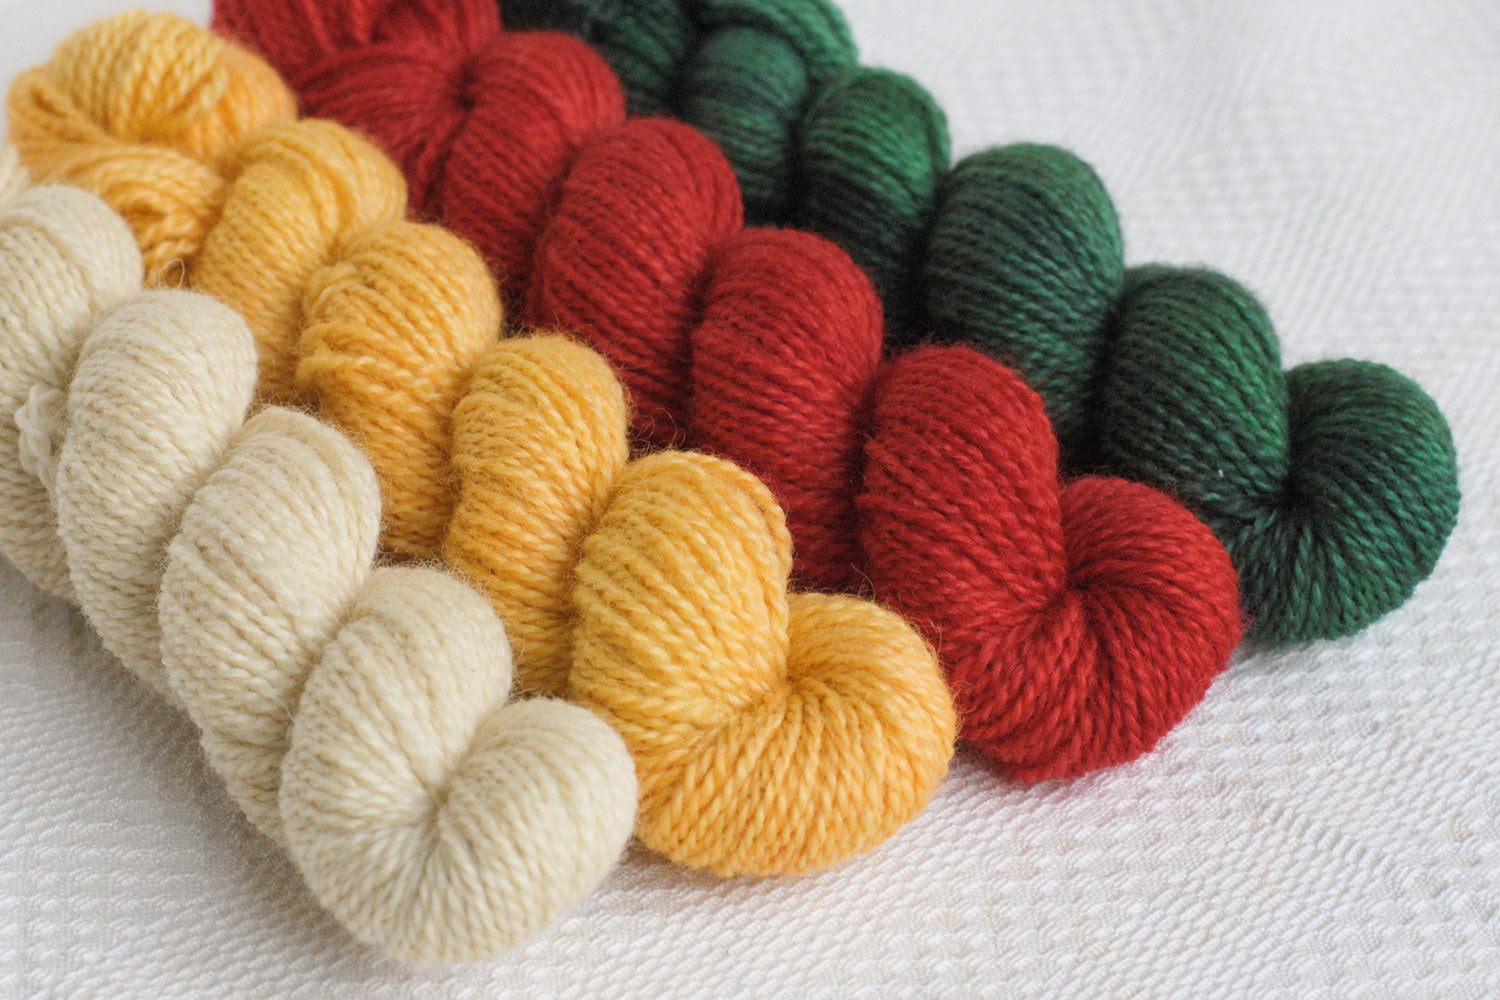 Set of four hand-dyed mini-skeins in natural, yellow, red, and green